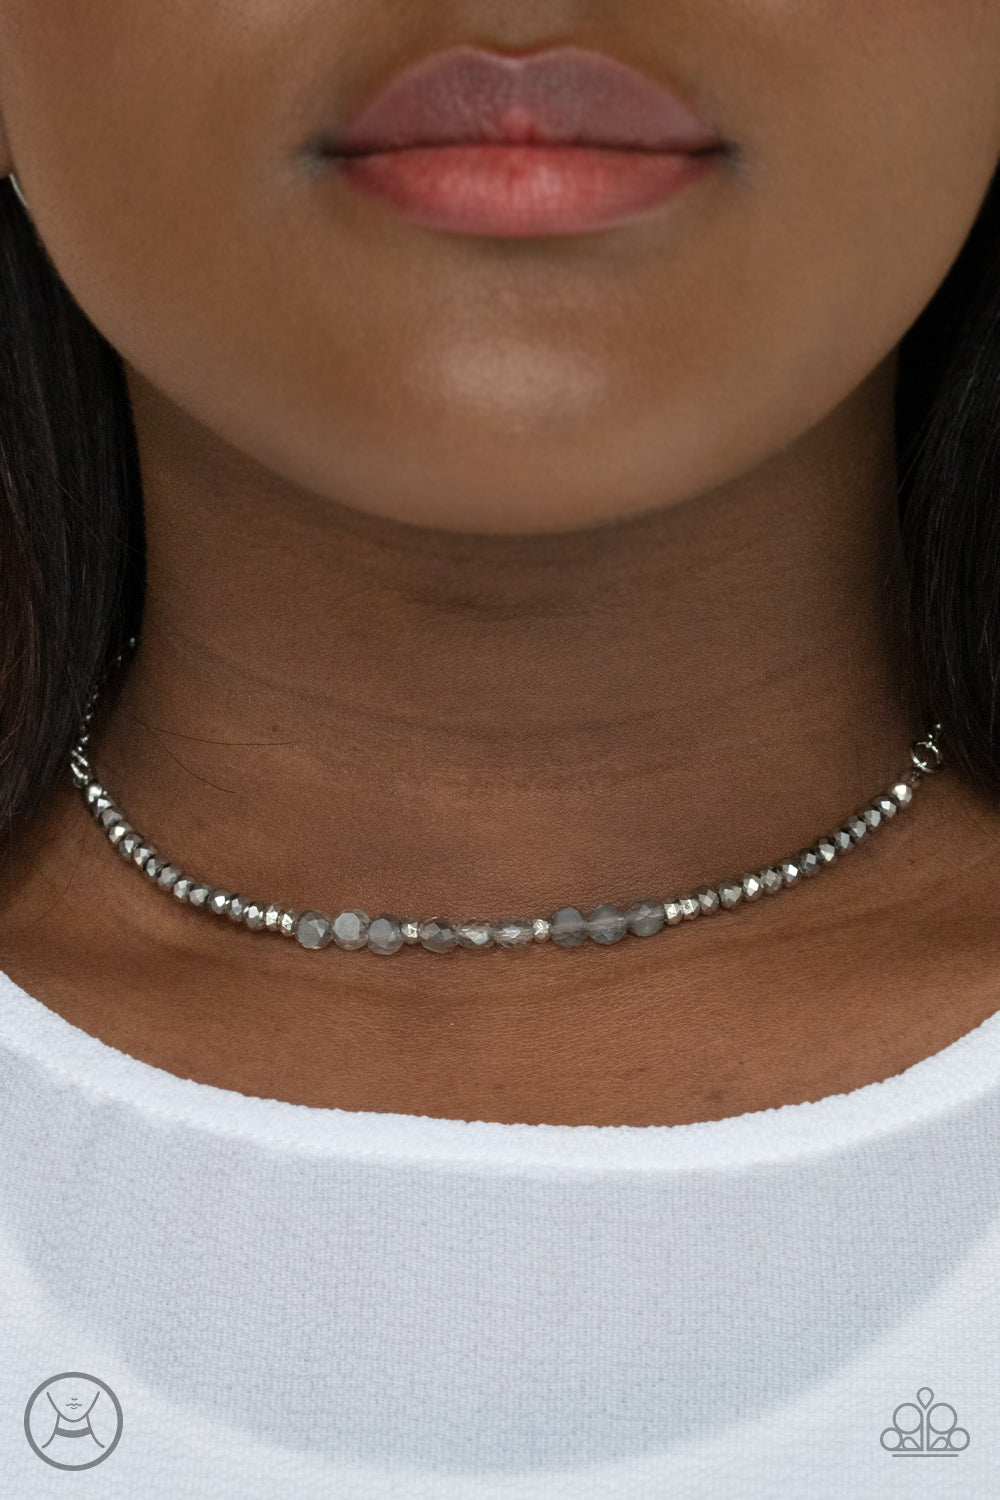 PRE-ORDER - Paparazzi Space Odyssey - Silver - Choker Necklace & Earrings - $5 Jewelry with Ashley Swint